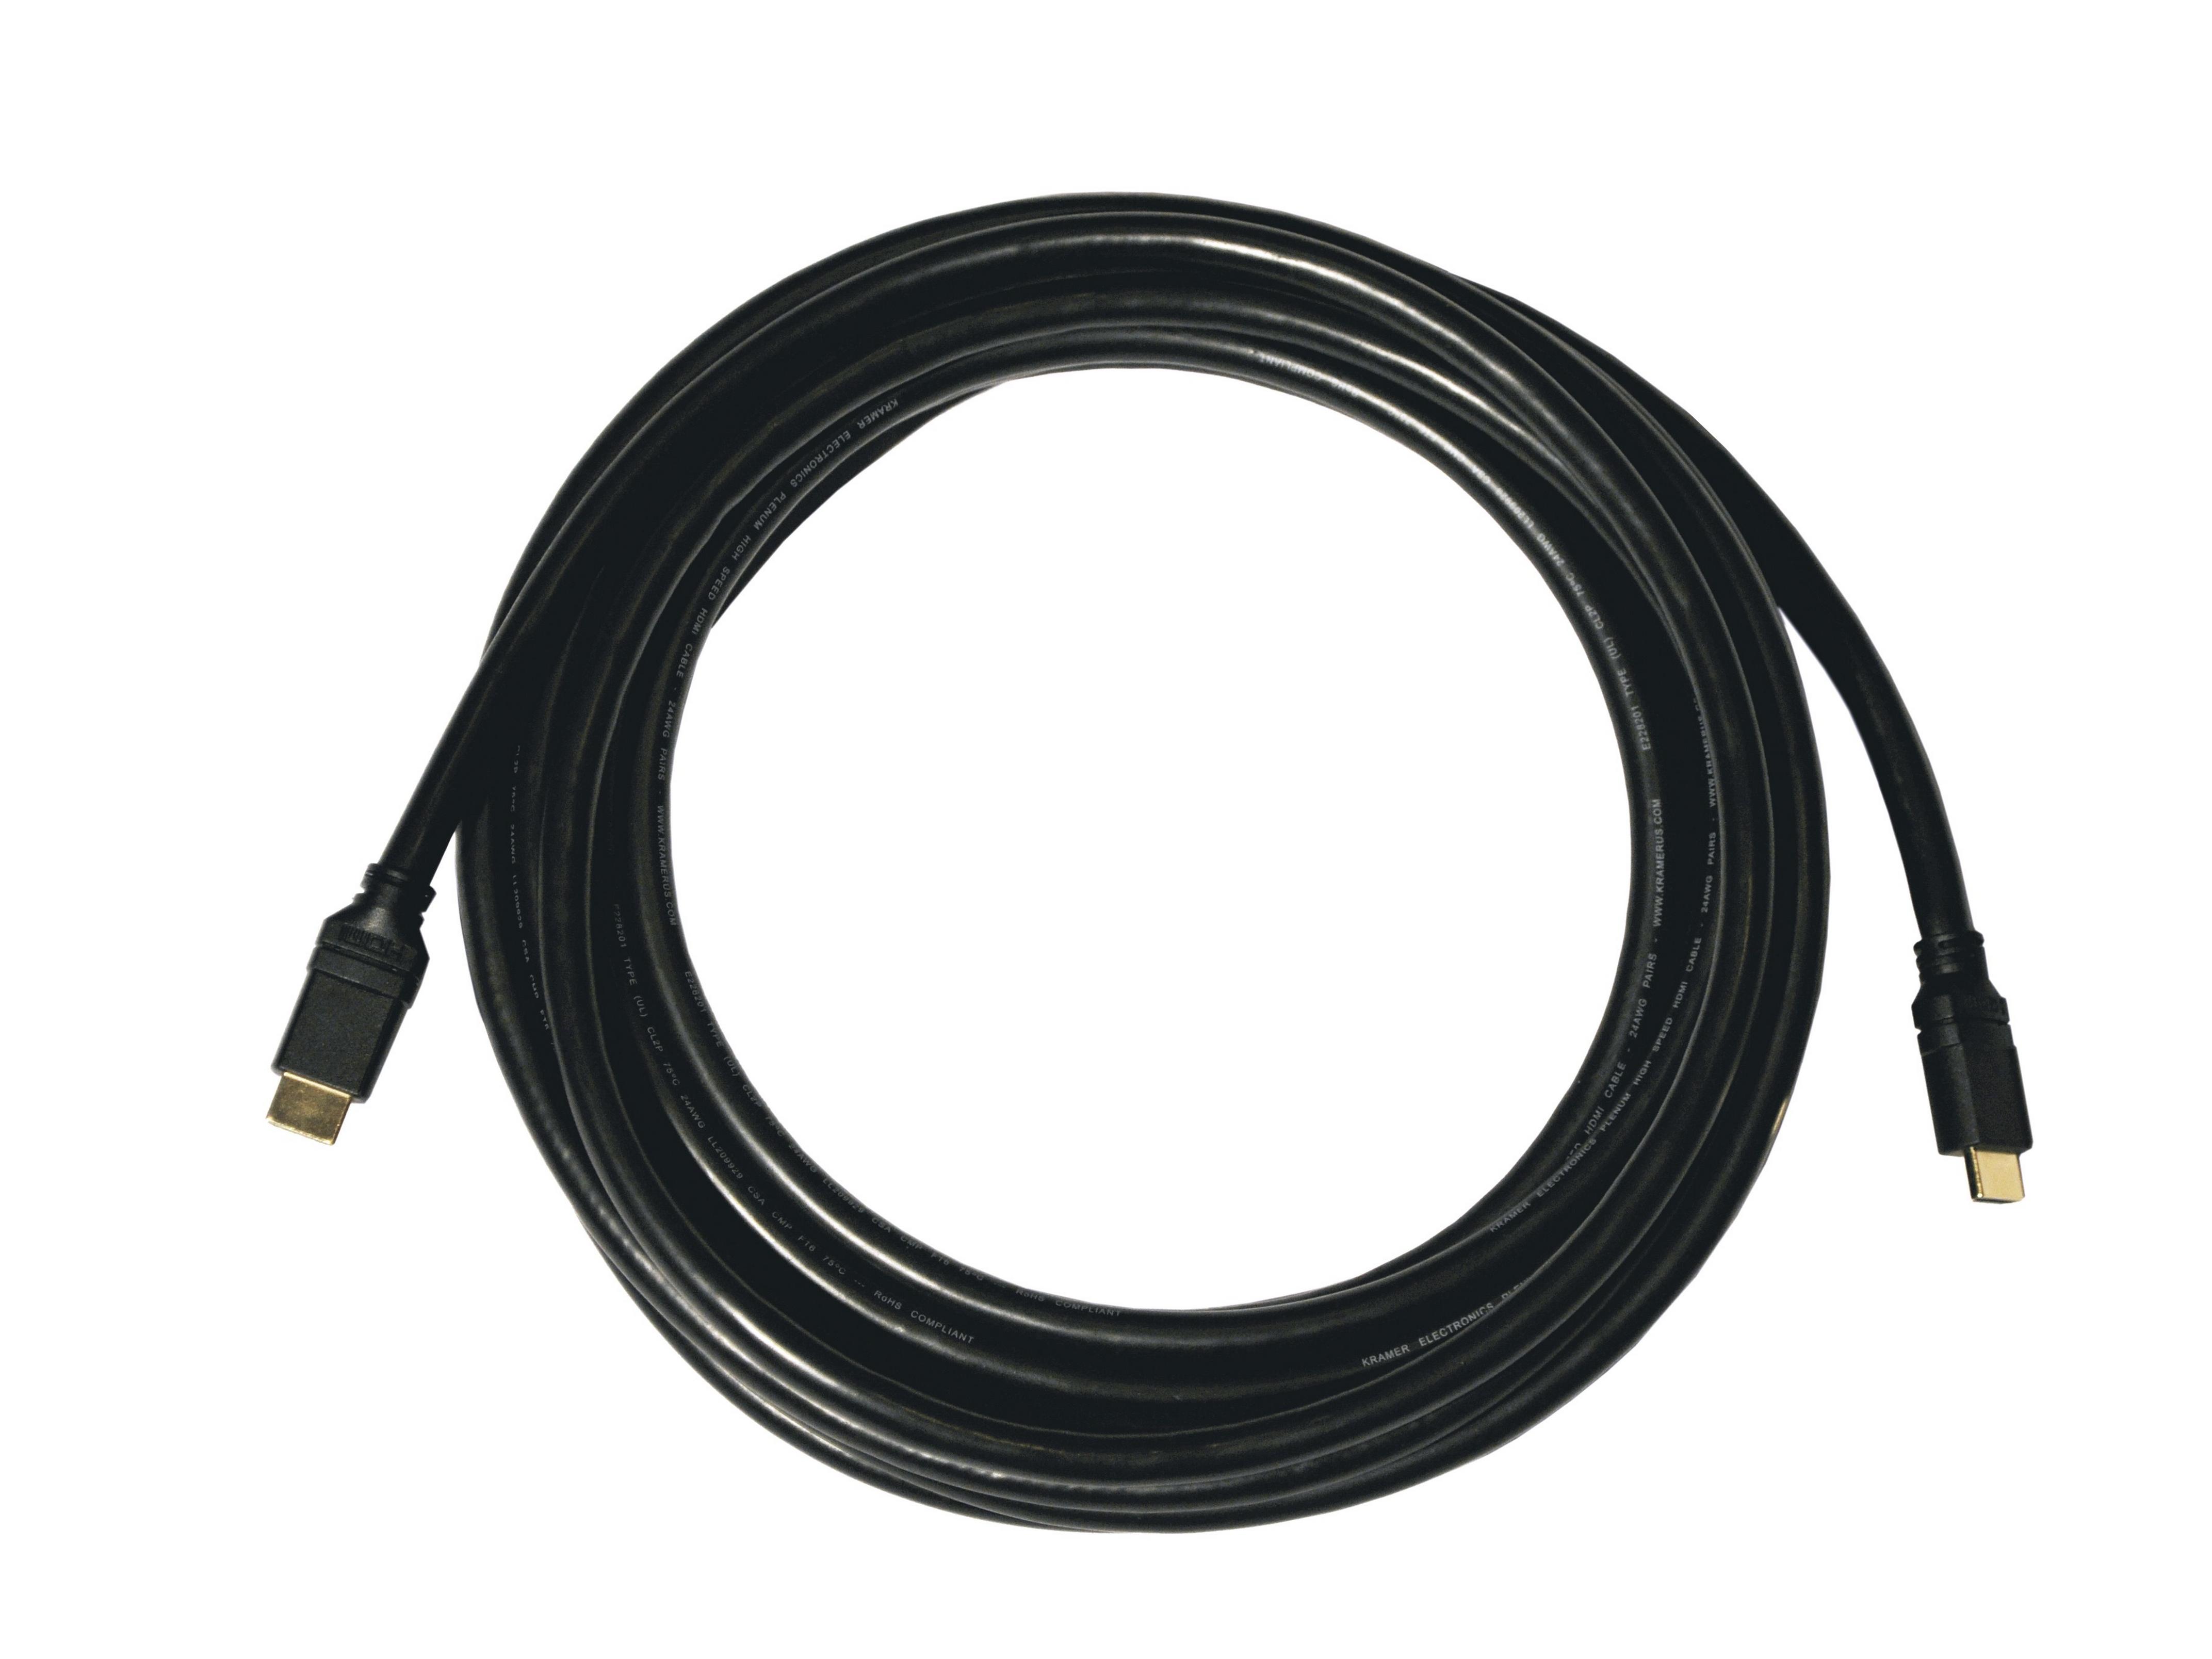 CP-HM/HM/ETH-15 15ft HDMI (M) to HDMI (M) Plenum Rated Cable with Ethernet by Kramer